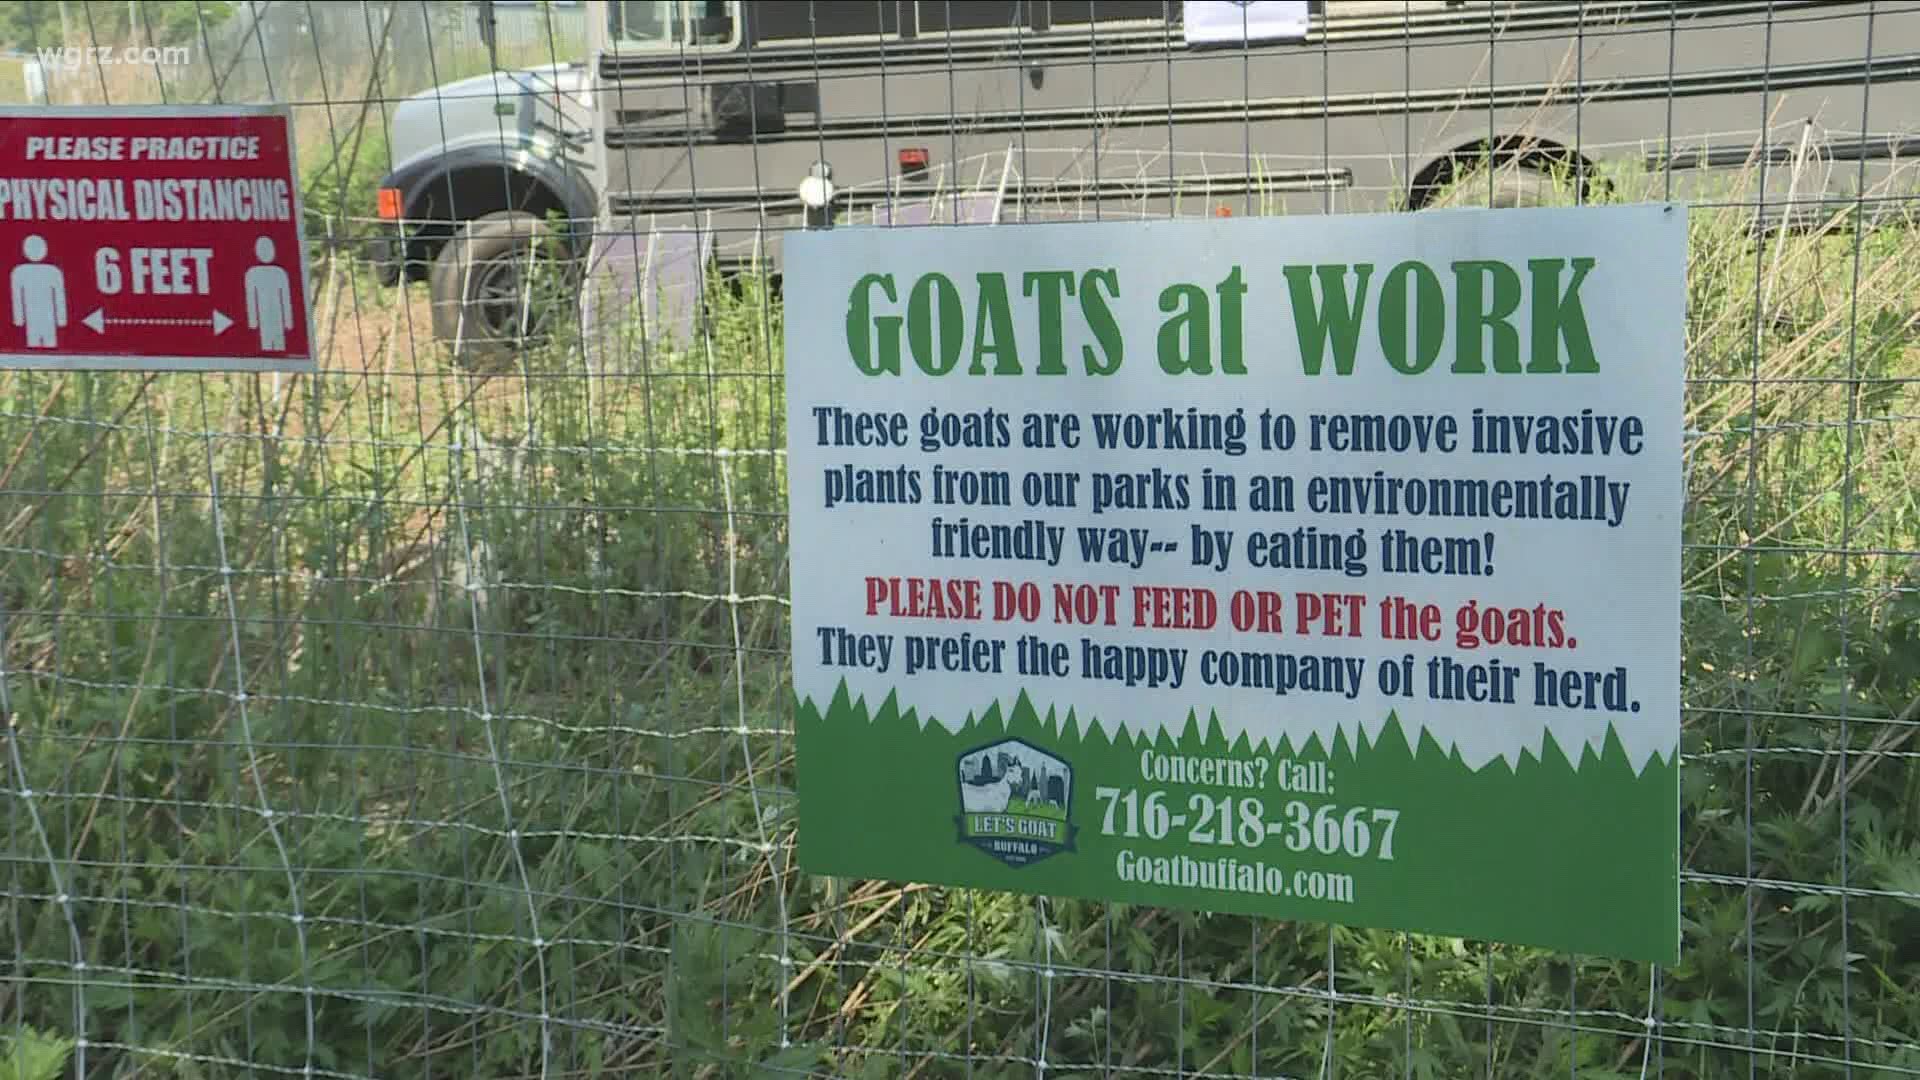 Let's Goat Buffalo herds moving to Concordia cemetery